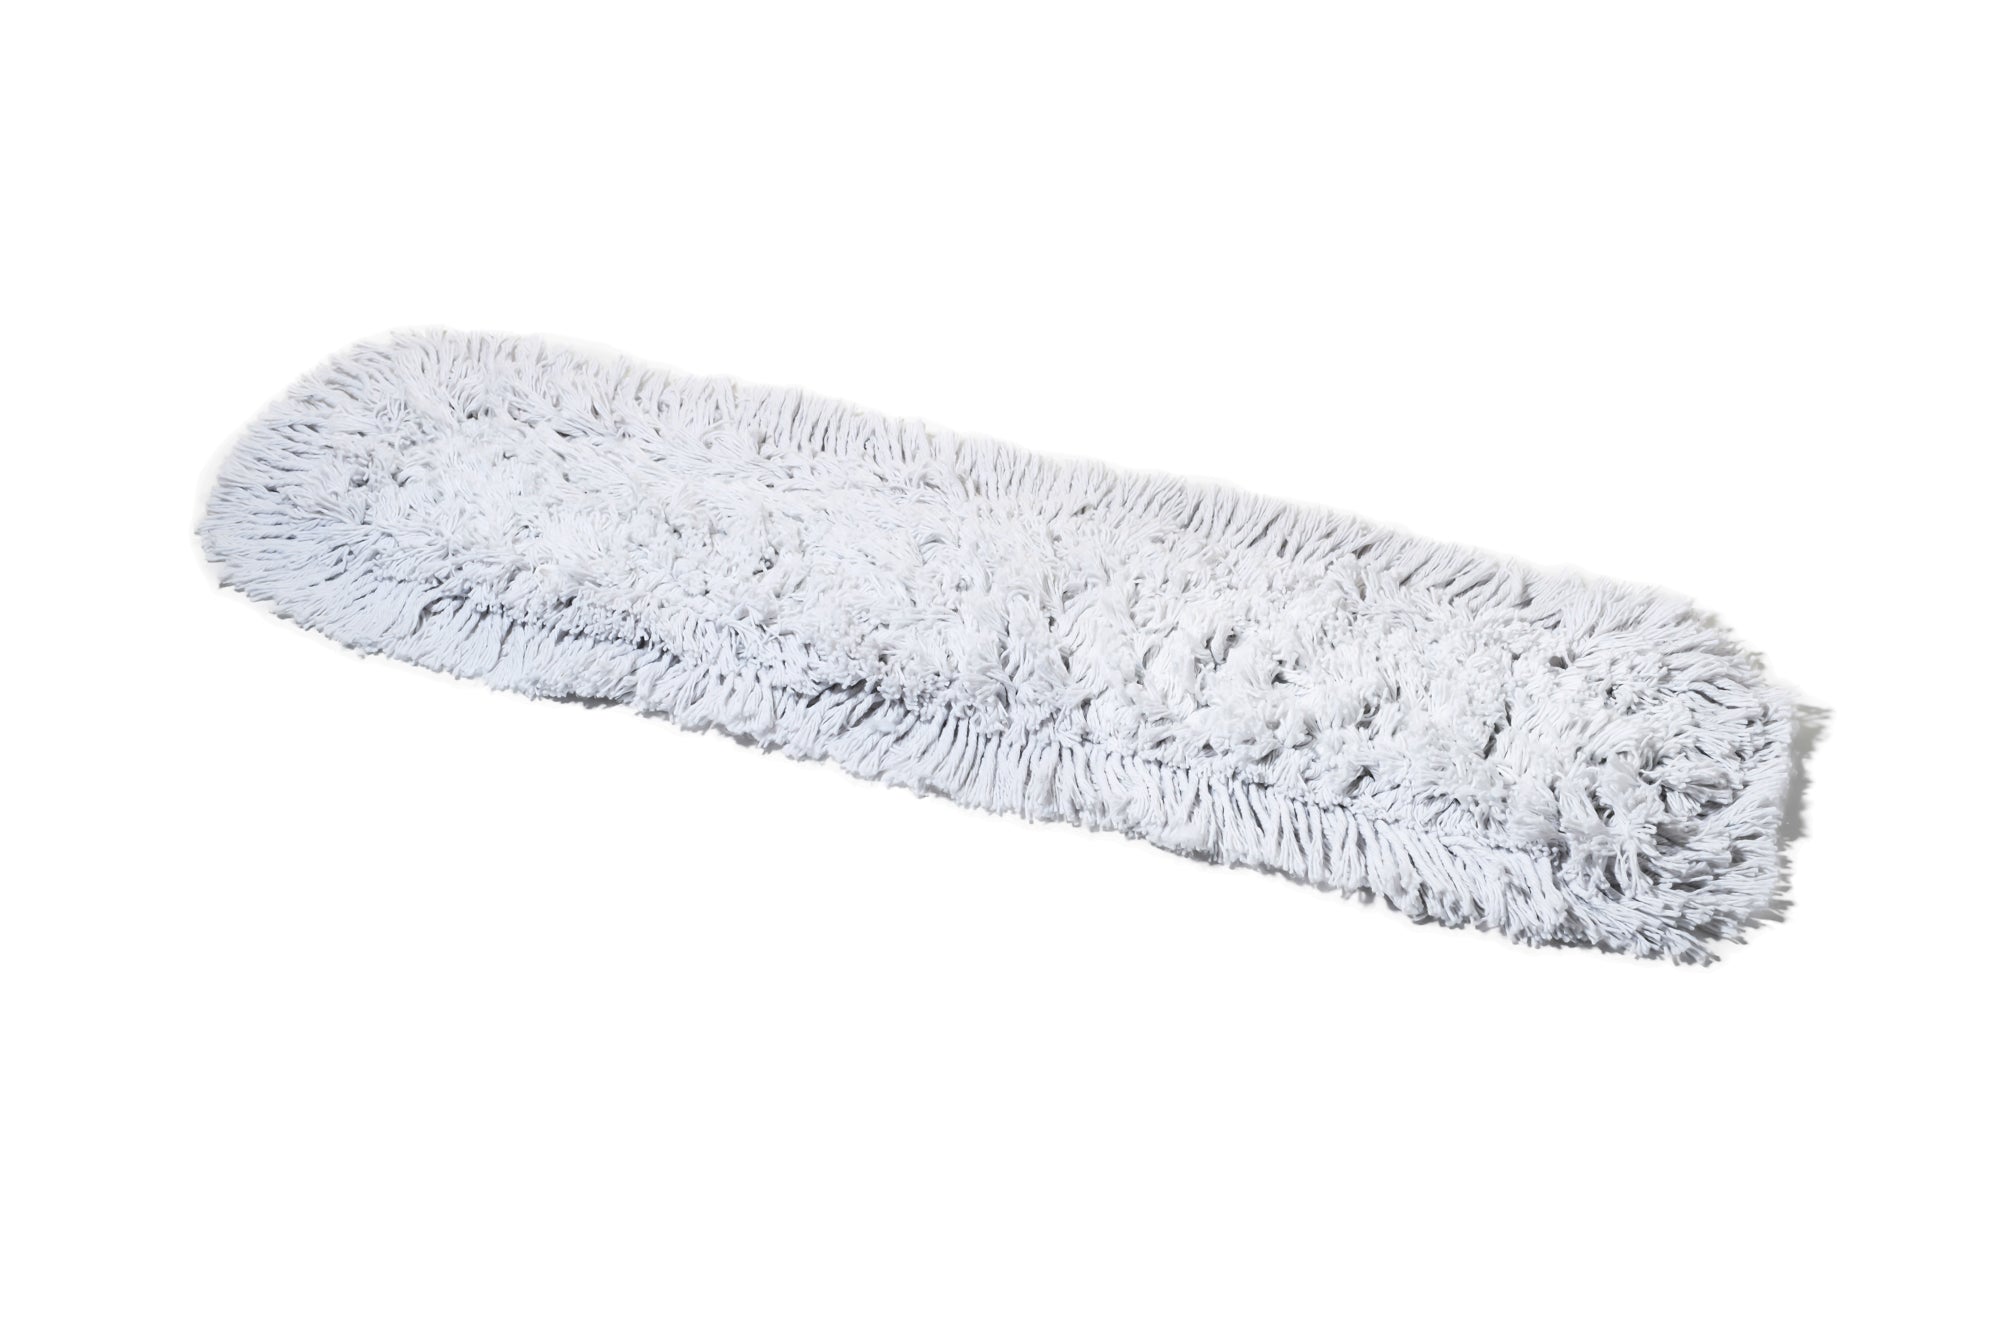 Tidy Tools 30 Inch Cotton Dust Mop Refill